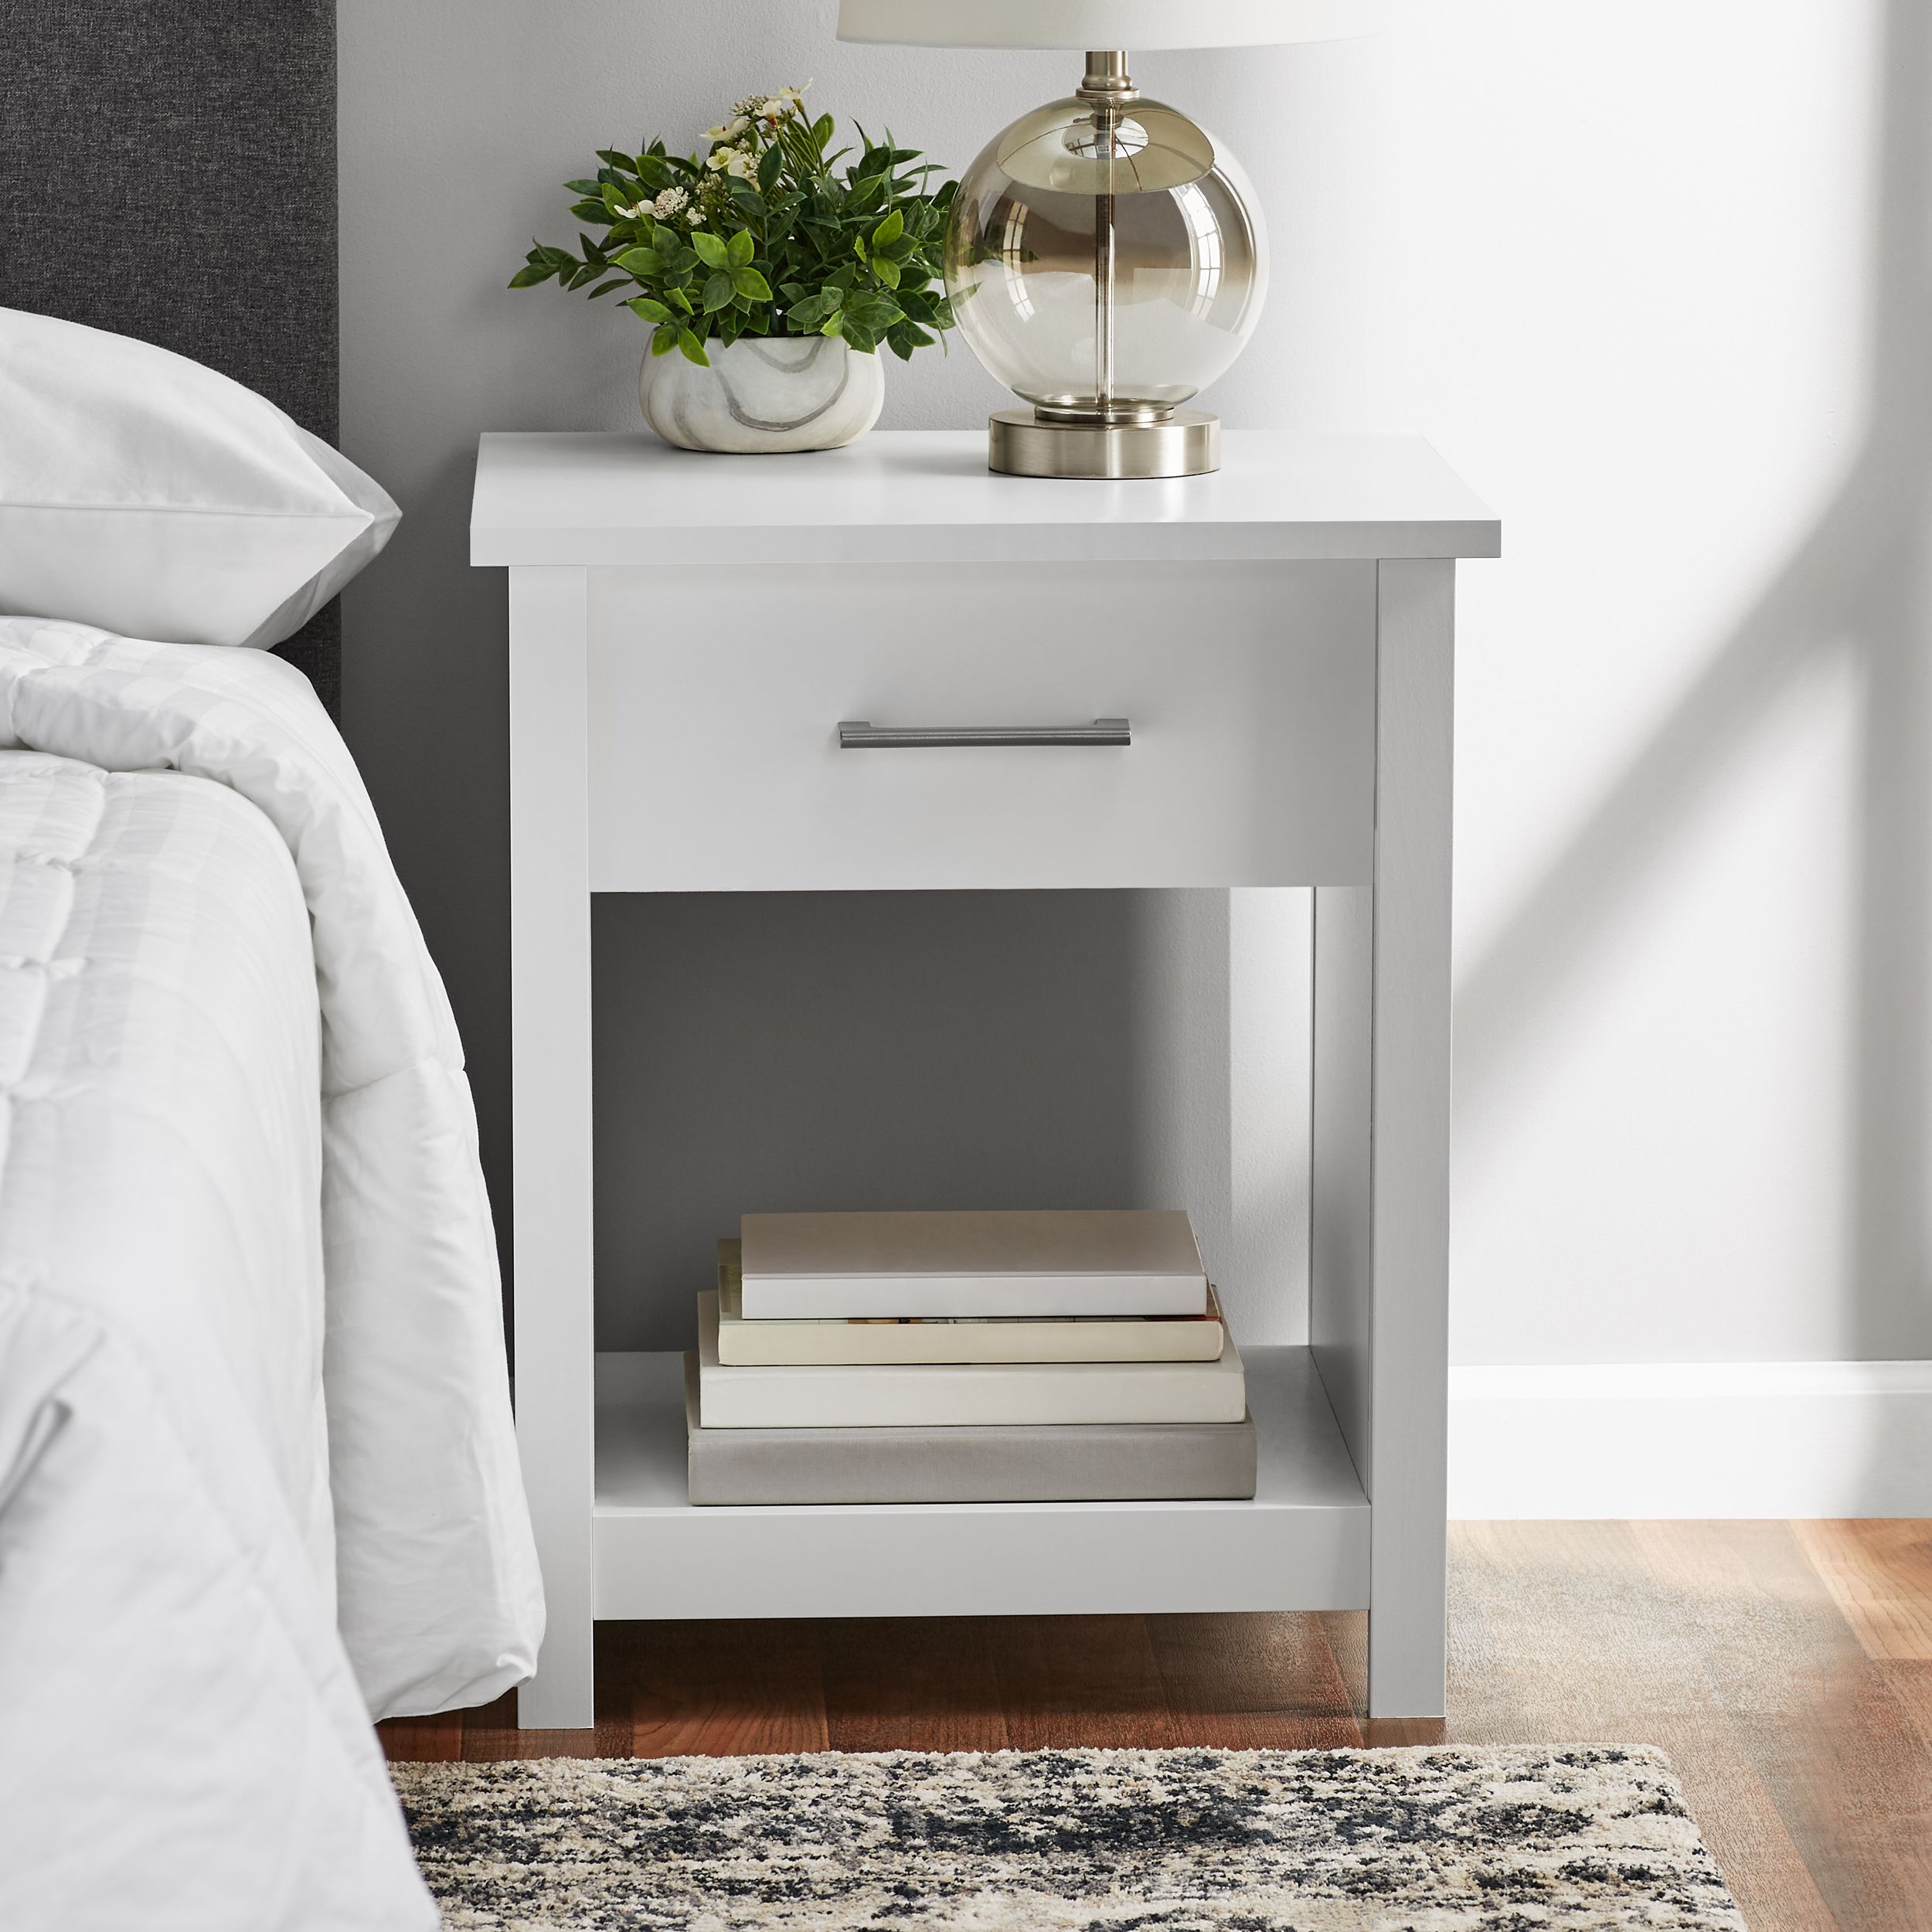 Install a White Side Table